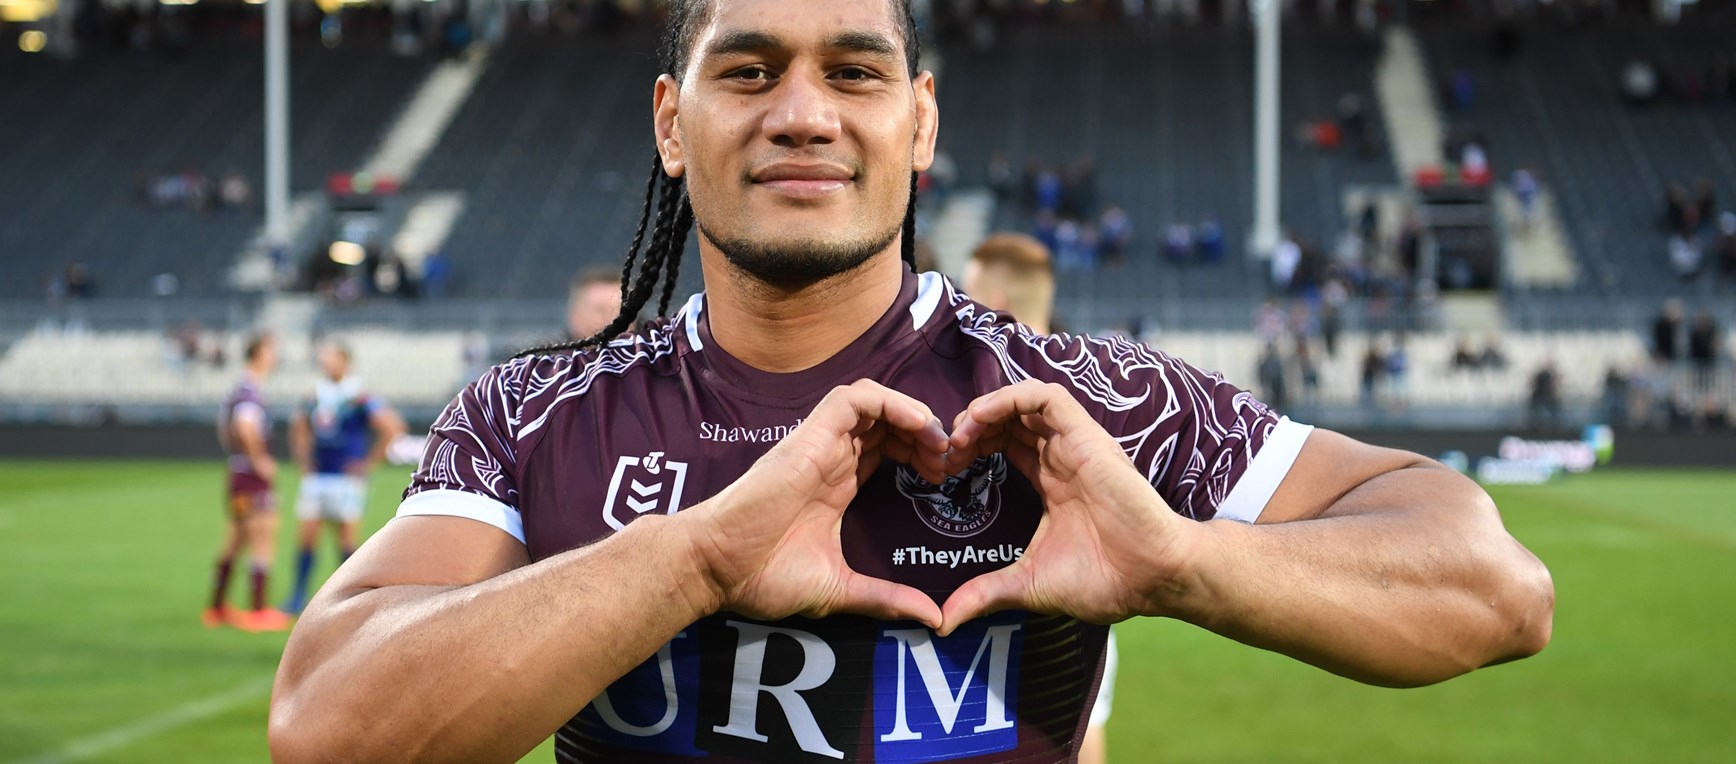 Best Sea Eagles photos of 2019